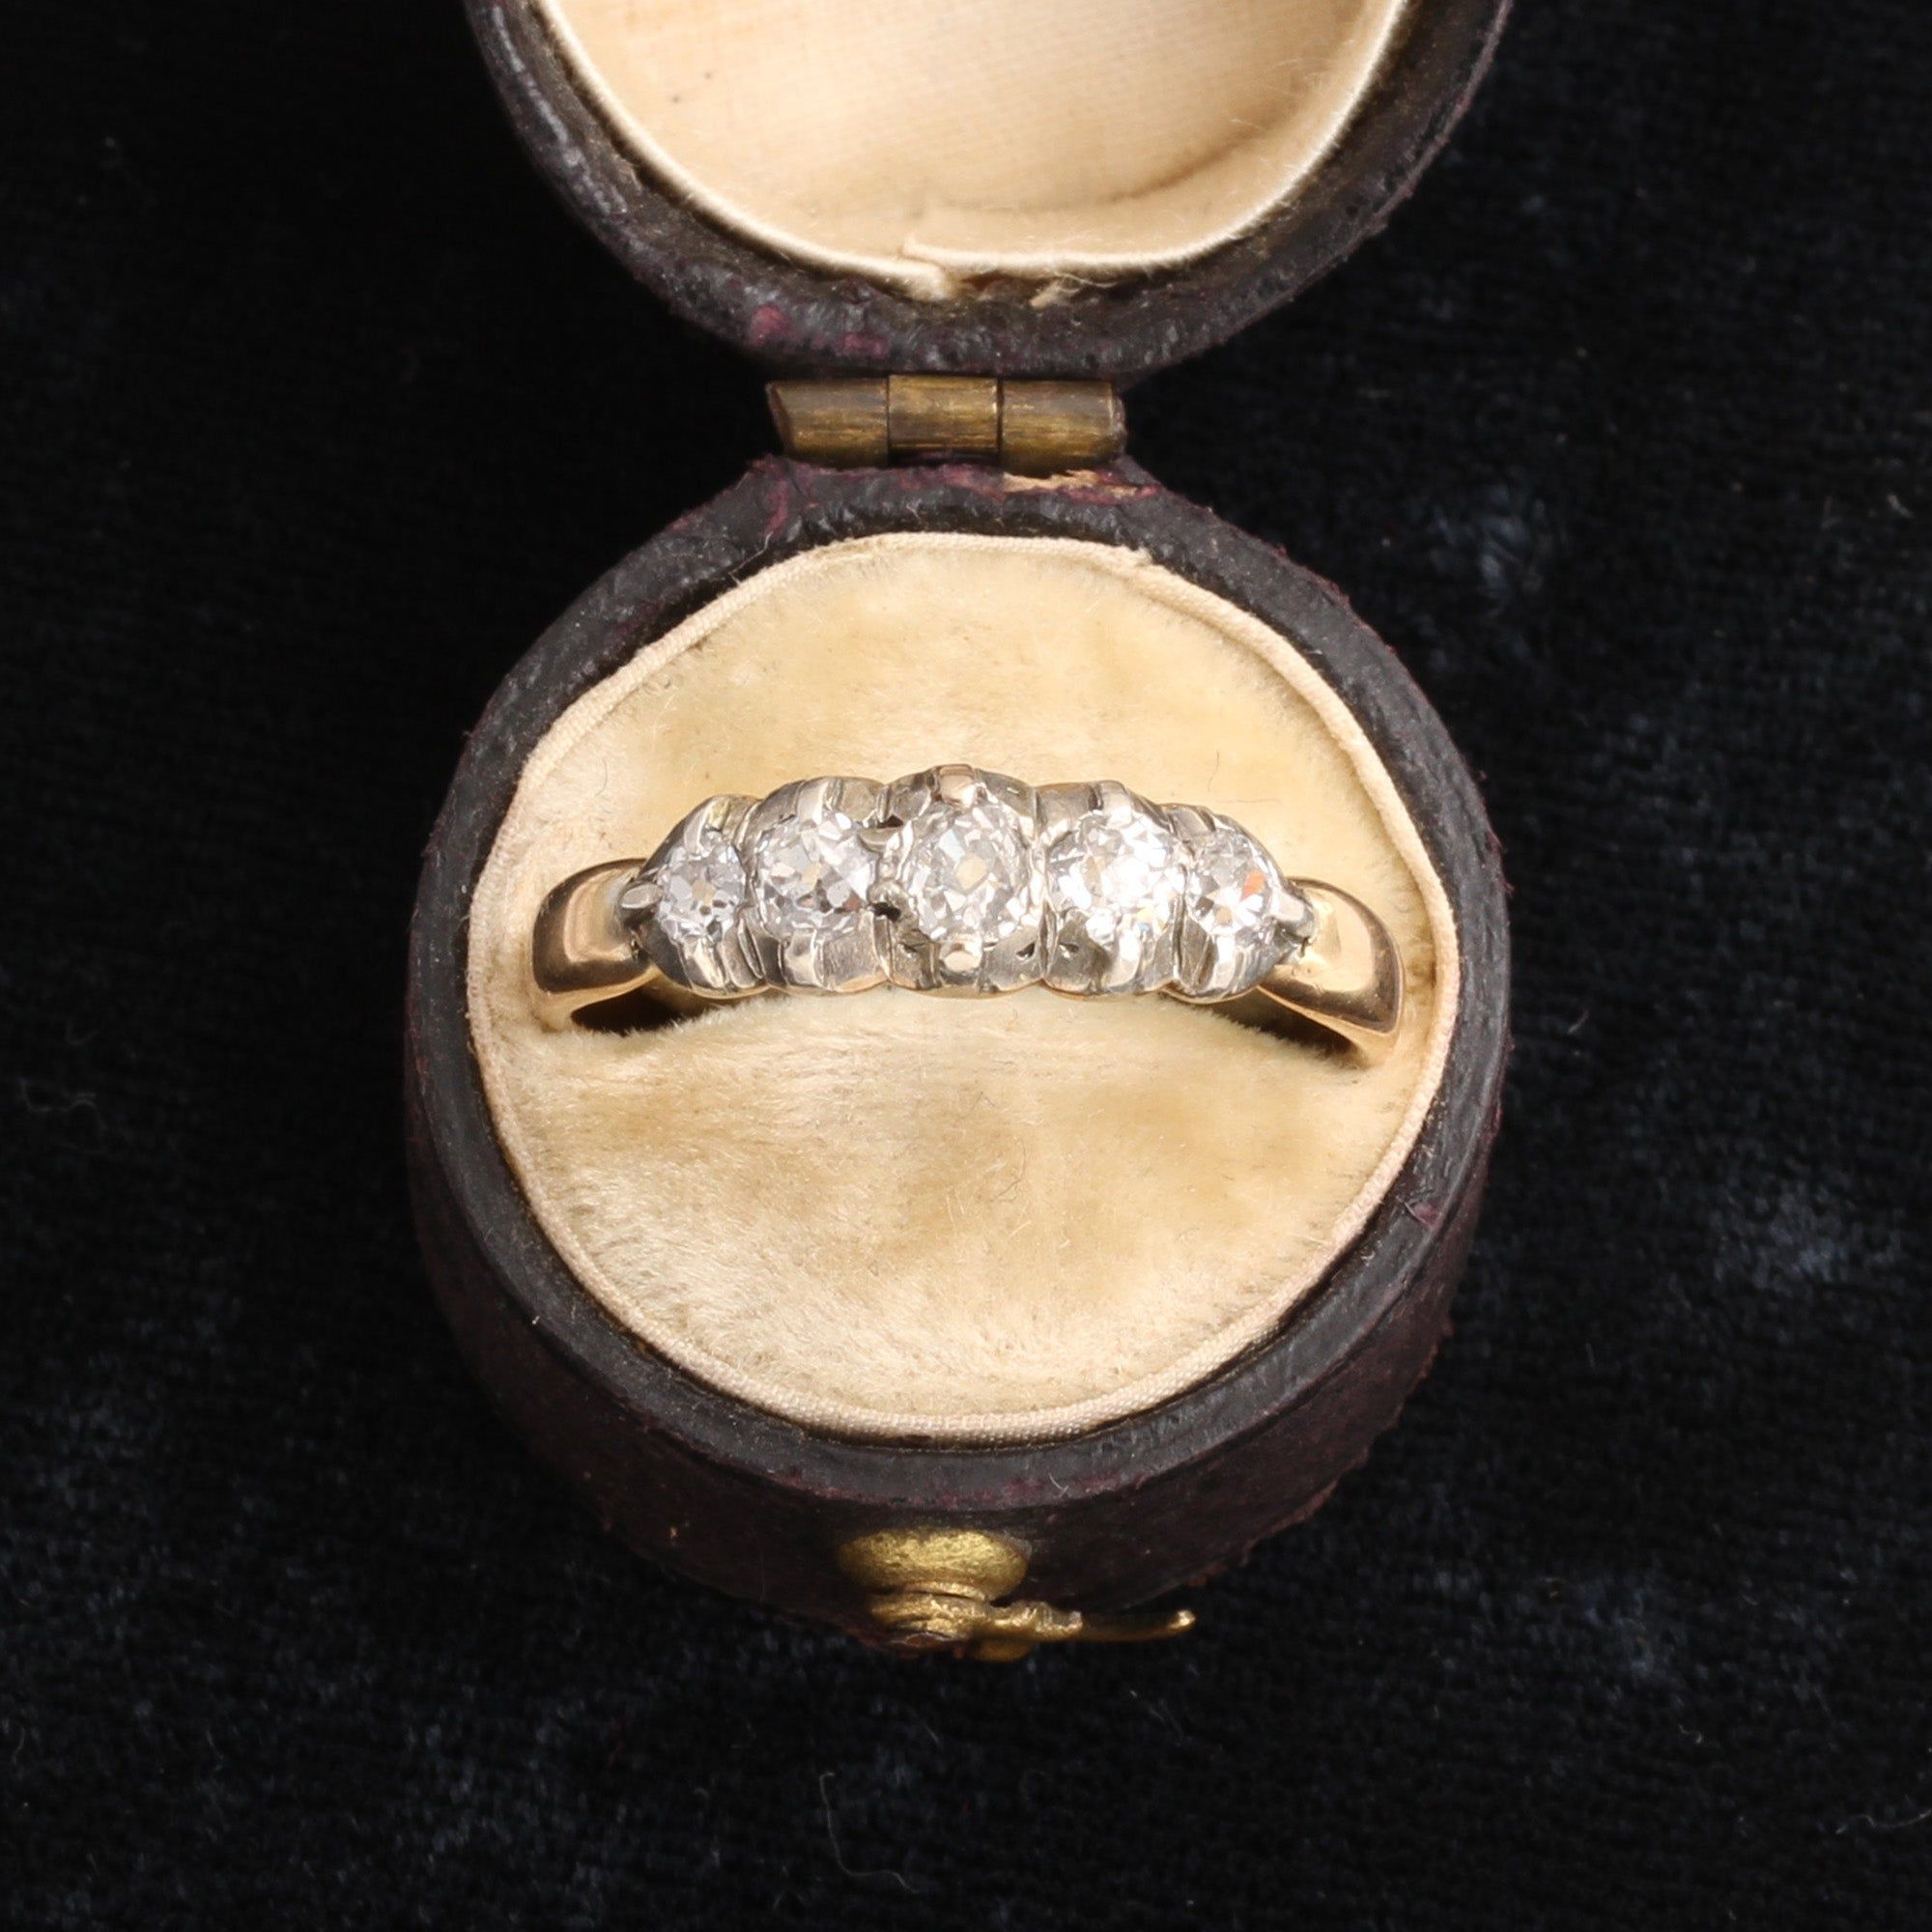 Early Victorian Five Diamond Ring